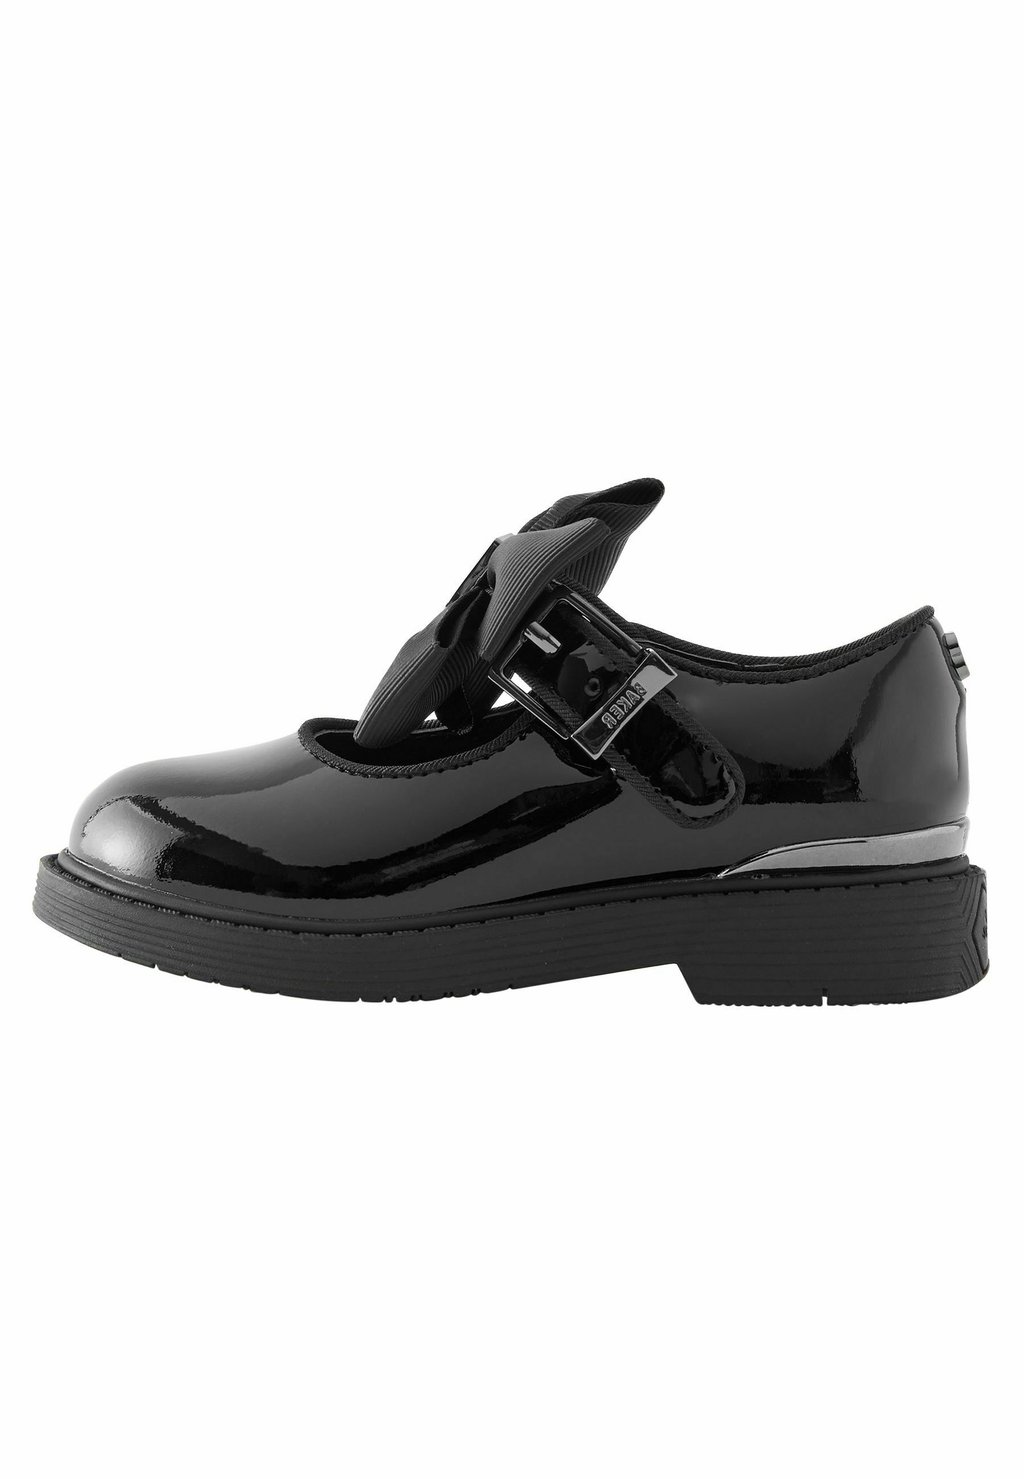 кроссовки ted baker lornea black Балетки BAKER BY TED BAKER GIRLS BACK TO SCHOOL MARY JANE BLACK SHOES WITH BOW, цвет black